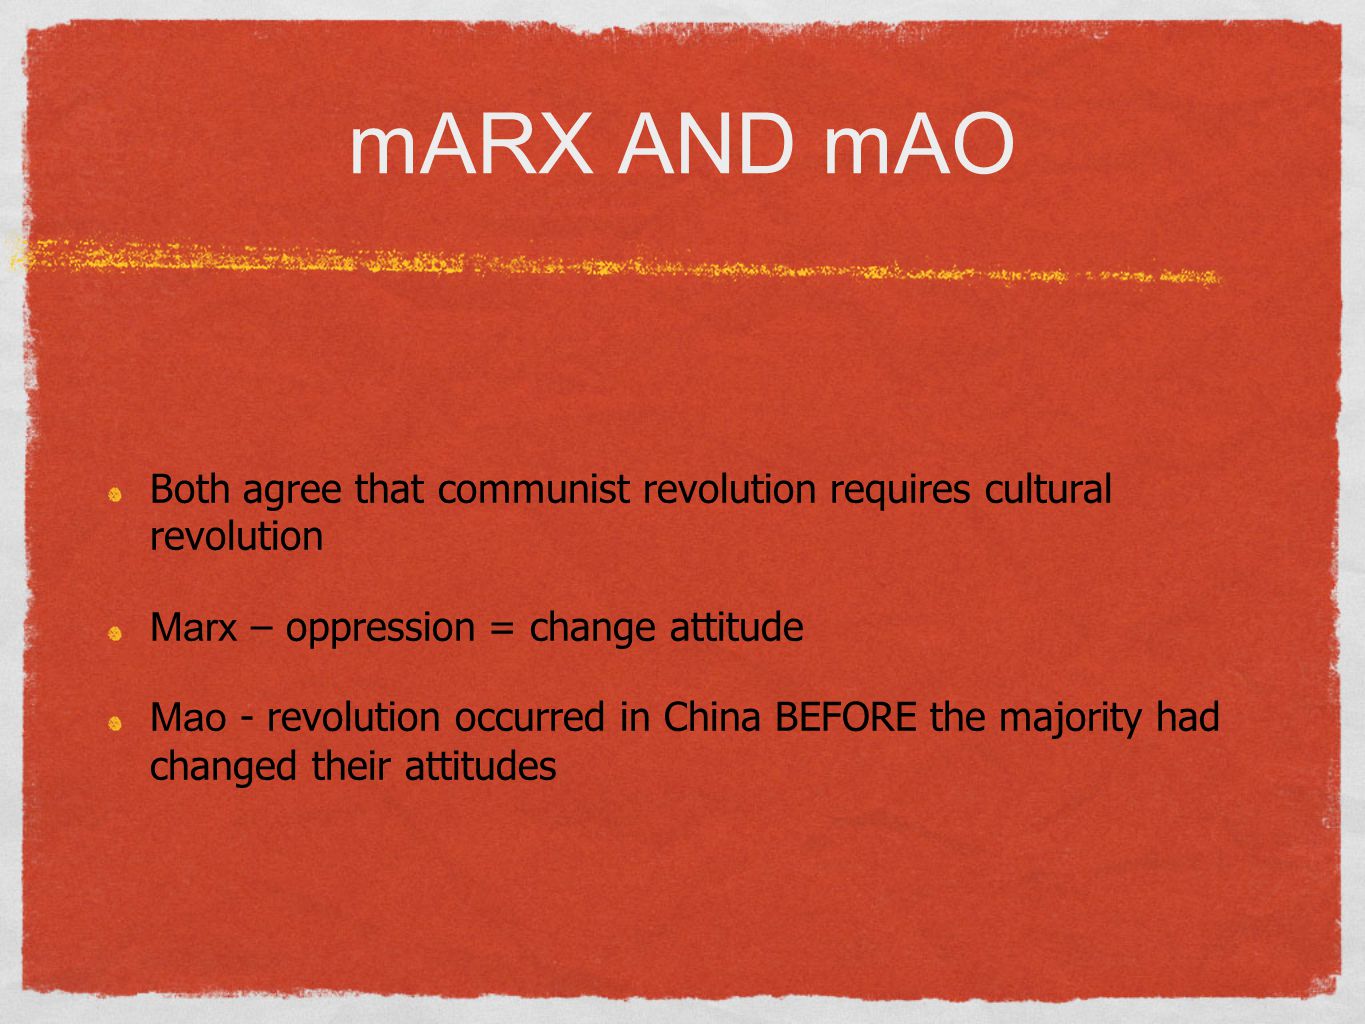 mARX AND mAO Both agree that communist revolution requires cultural revolution Marx – oppression = change attitude Mao - revolution occurred in China BEFORE the majority had changed their attitudes